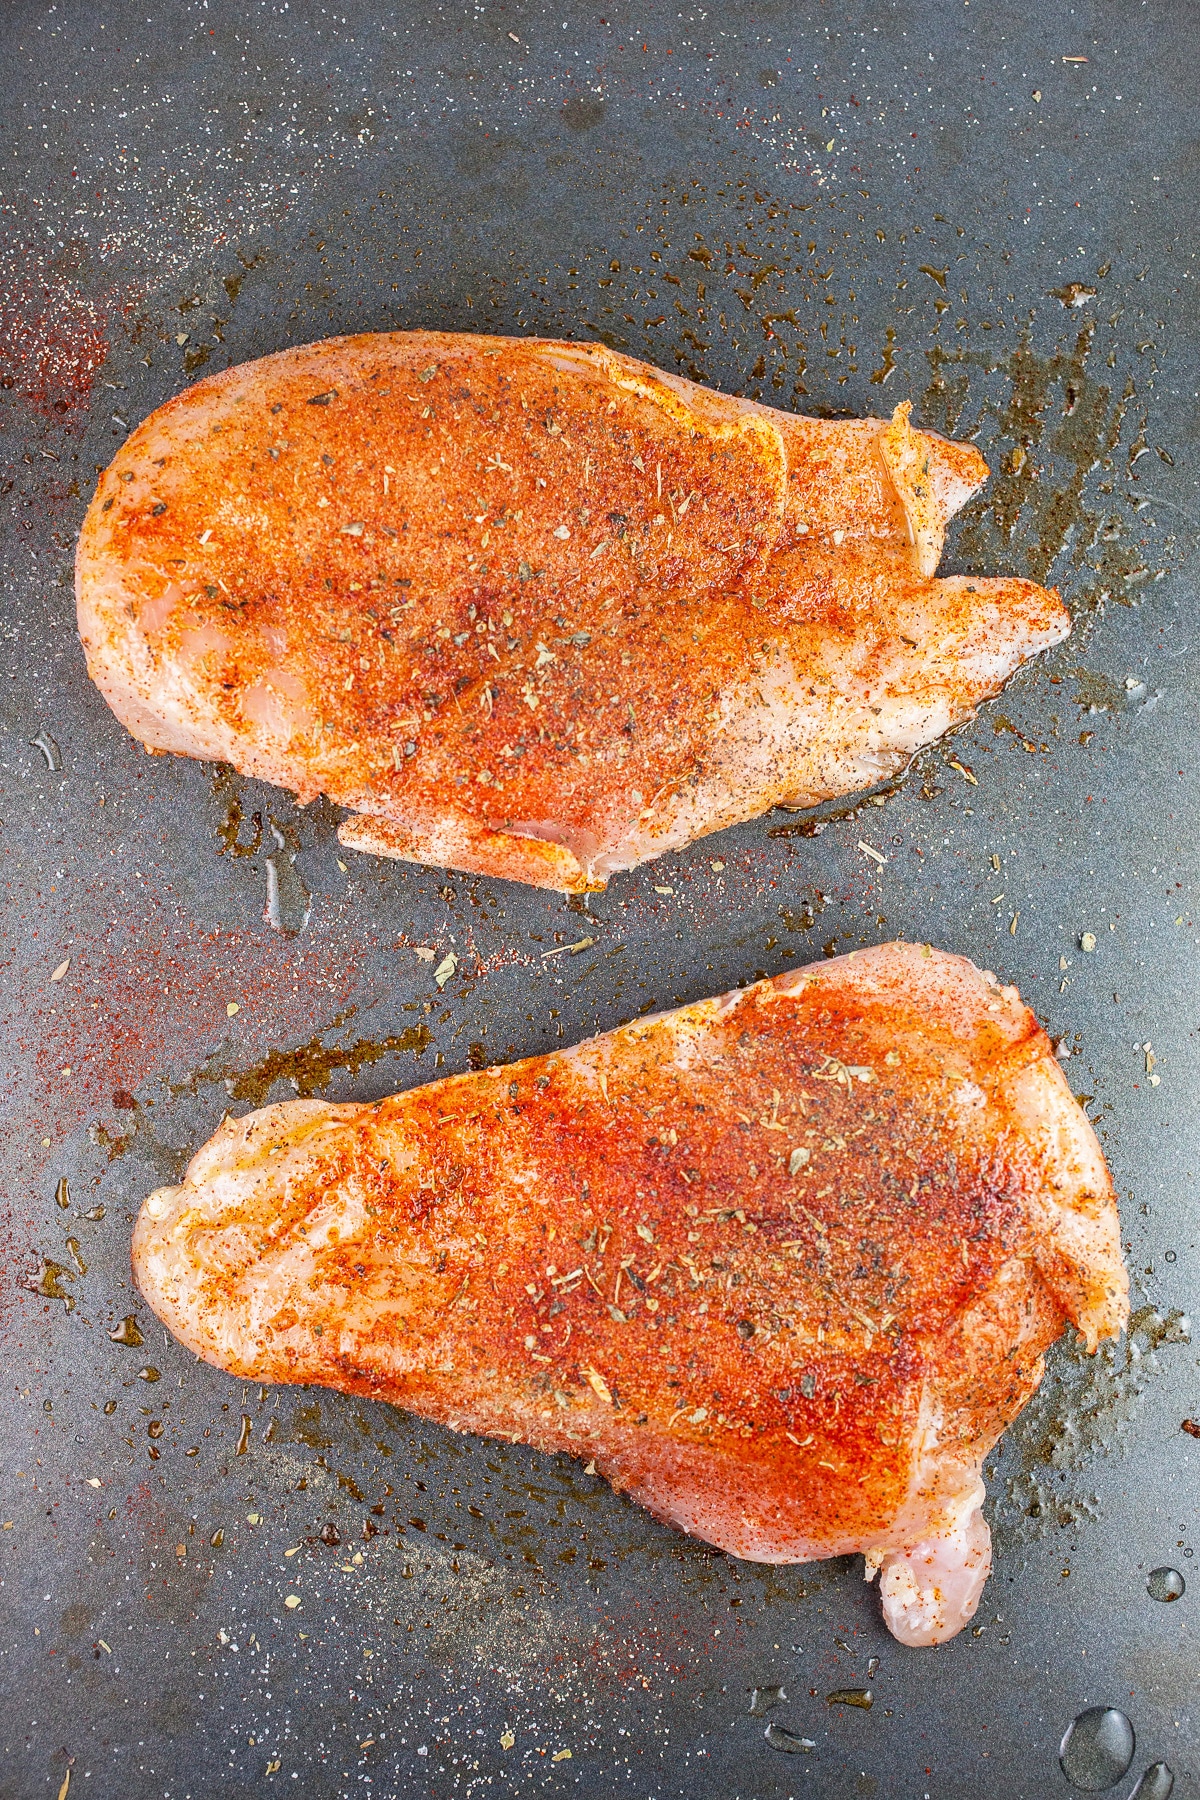 Uncooked spiced chicken breasts on baking sheet.